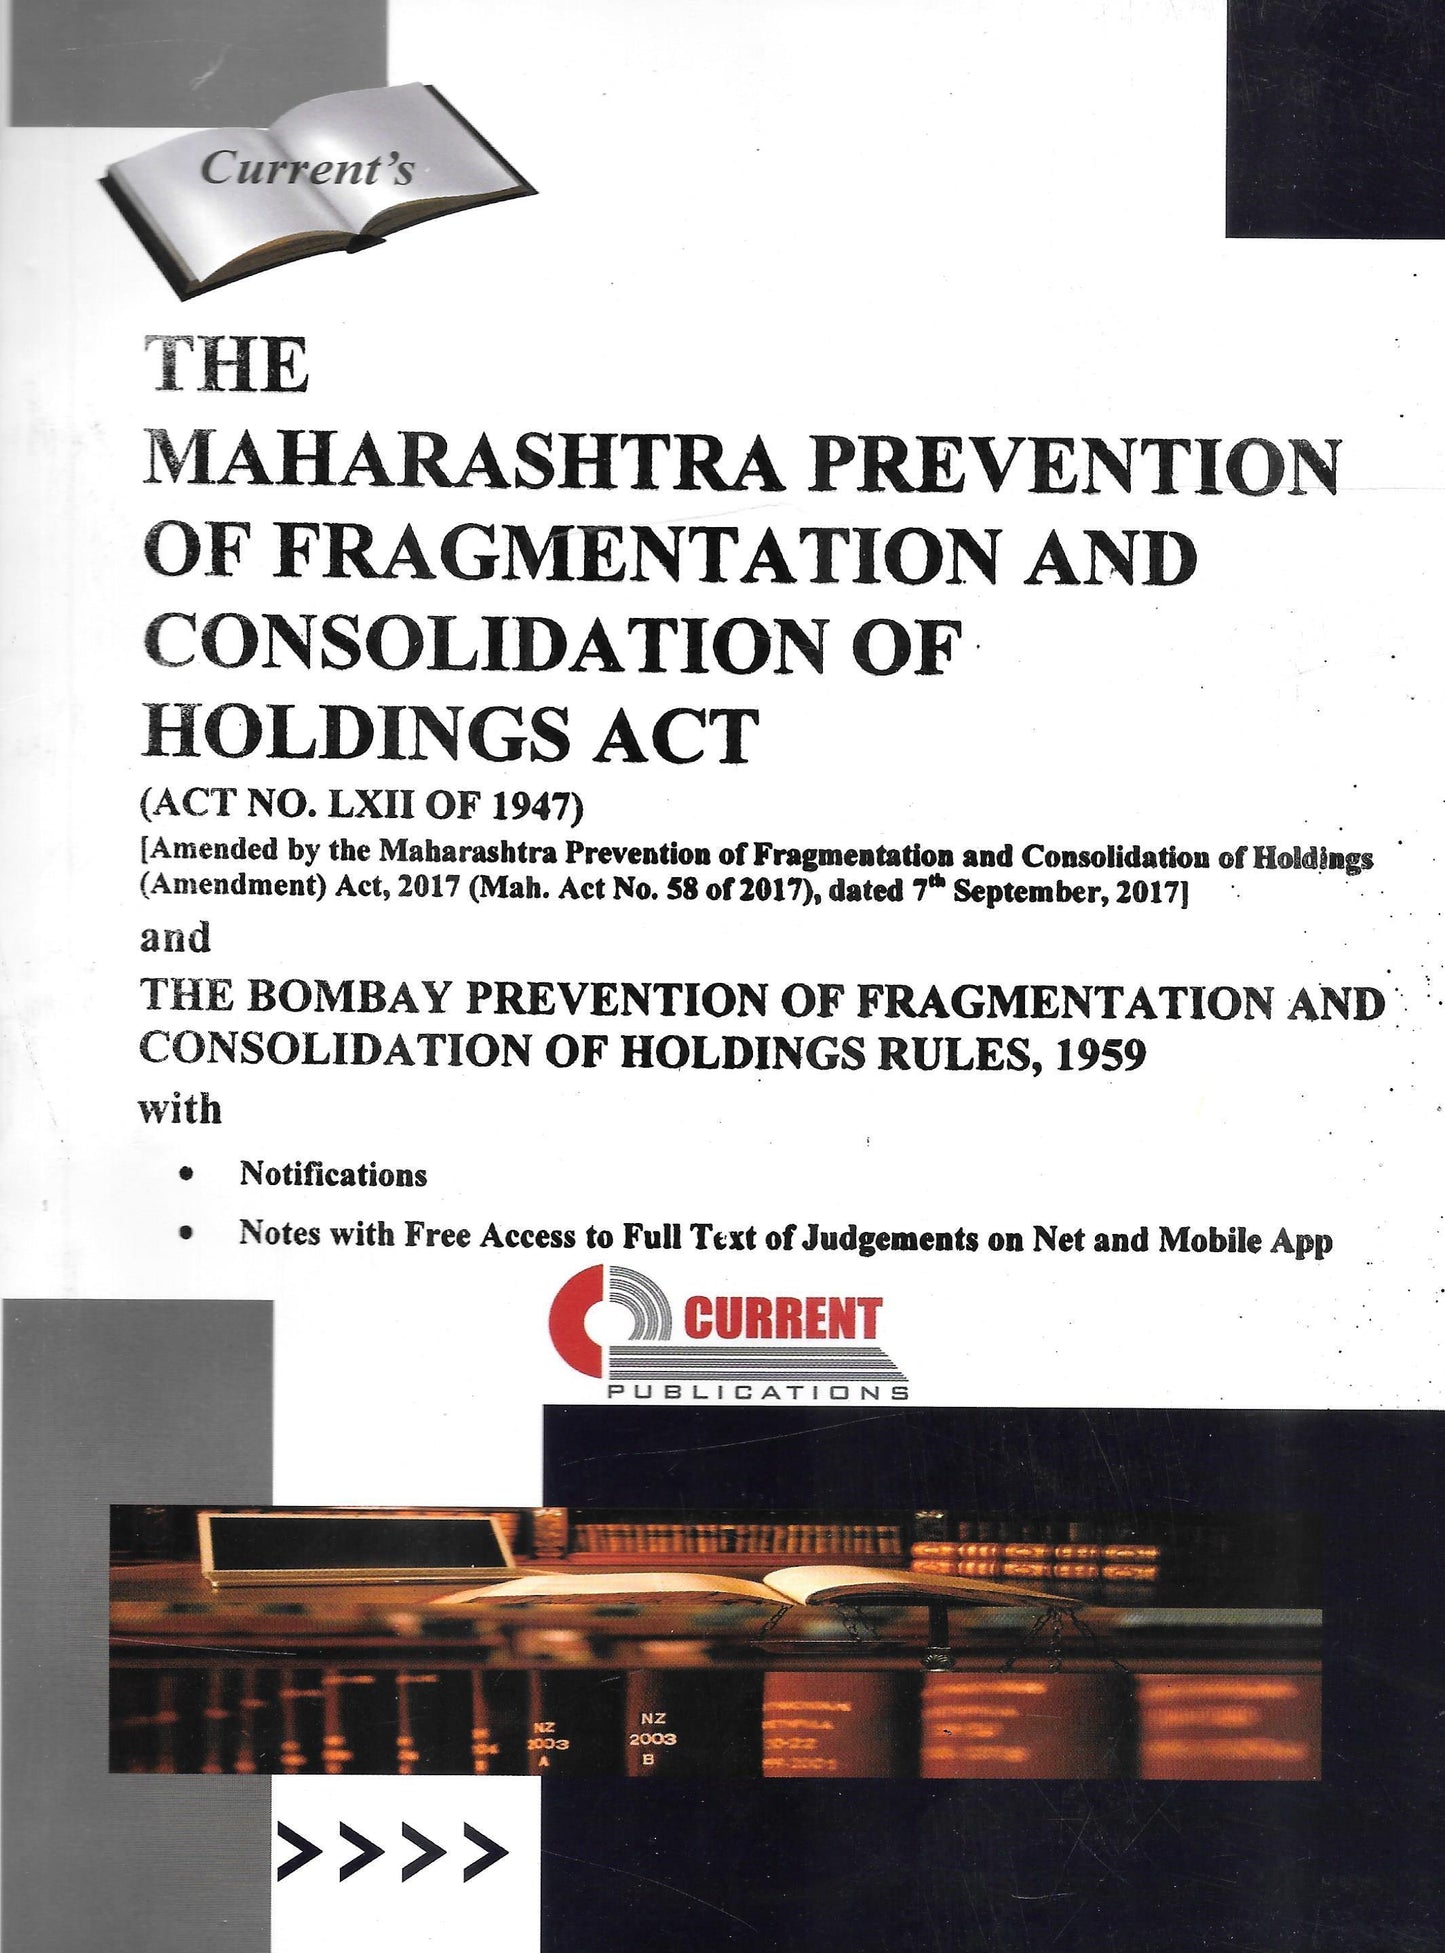 The Maharashtra Prevention of Fragmentation and Consolidation of Holdings Act